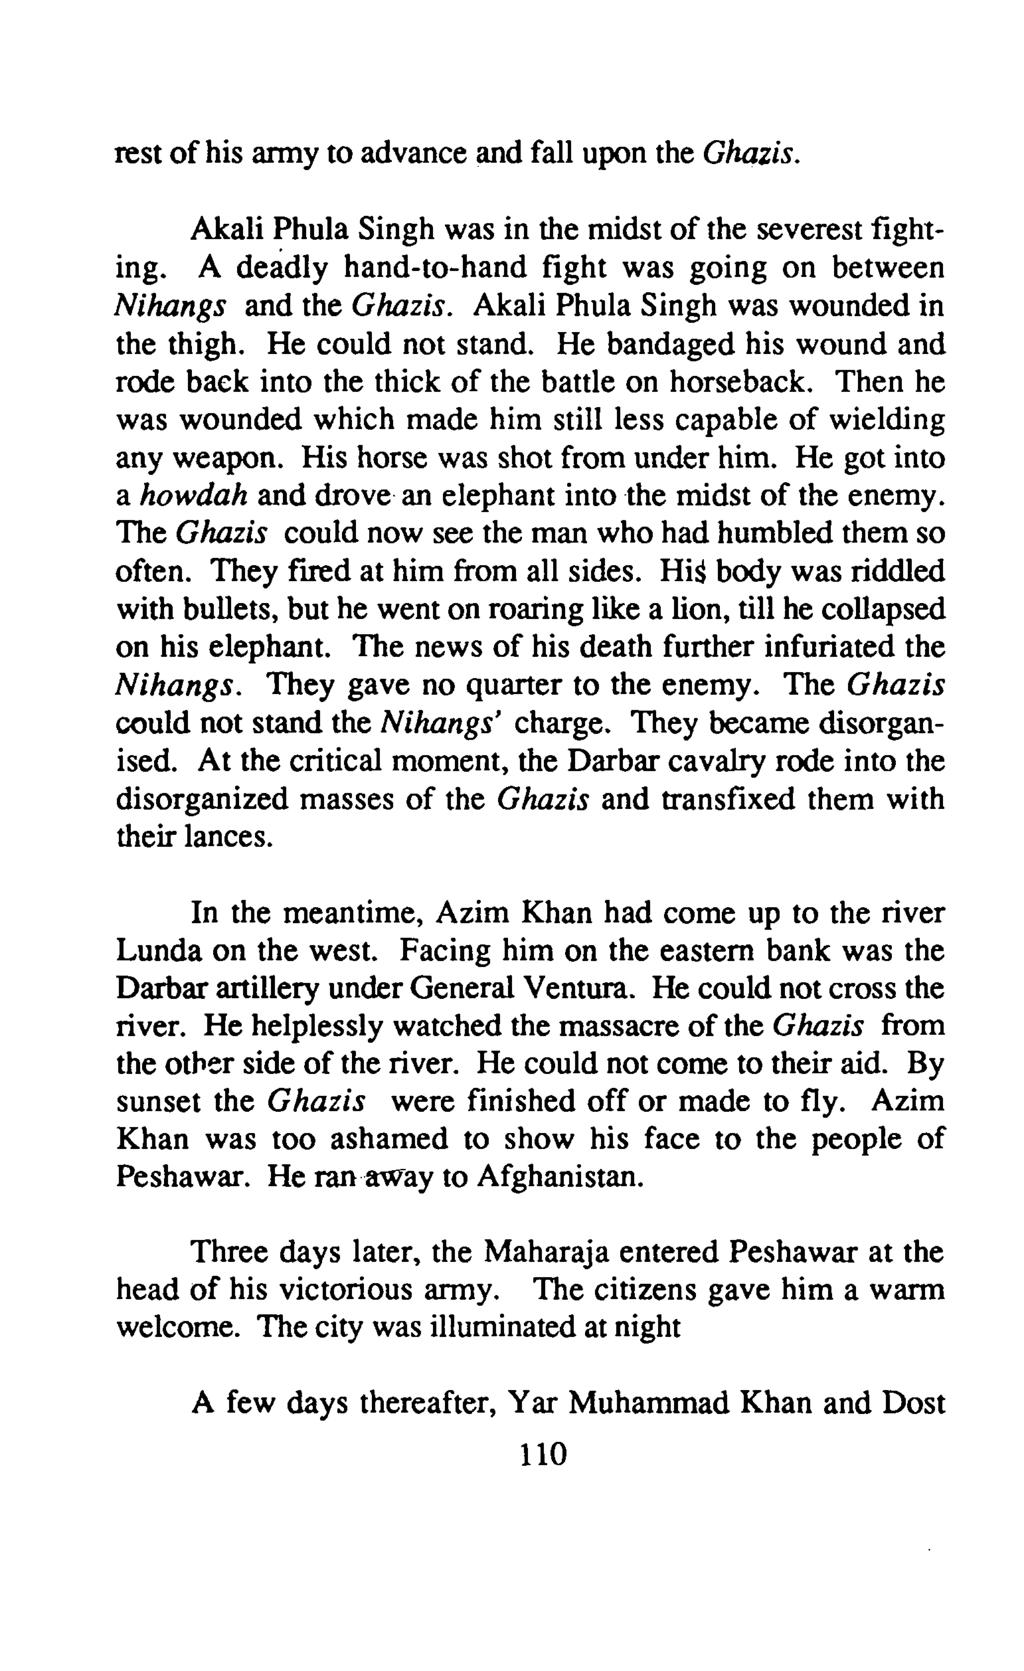 rest ofhis anny to advance and fall upon the Ghazis. Akali Phula Singh was in the midst of the severest fighting. A deadly hand-to-hand fight was going on between Nihangs and the Ghazis.